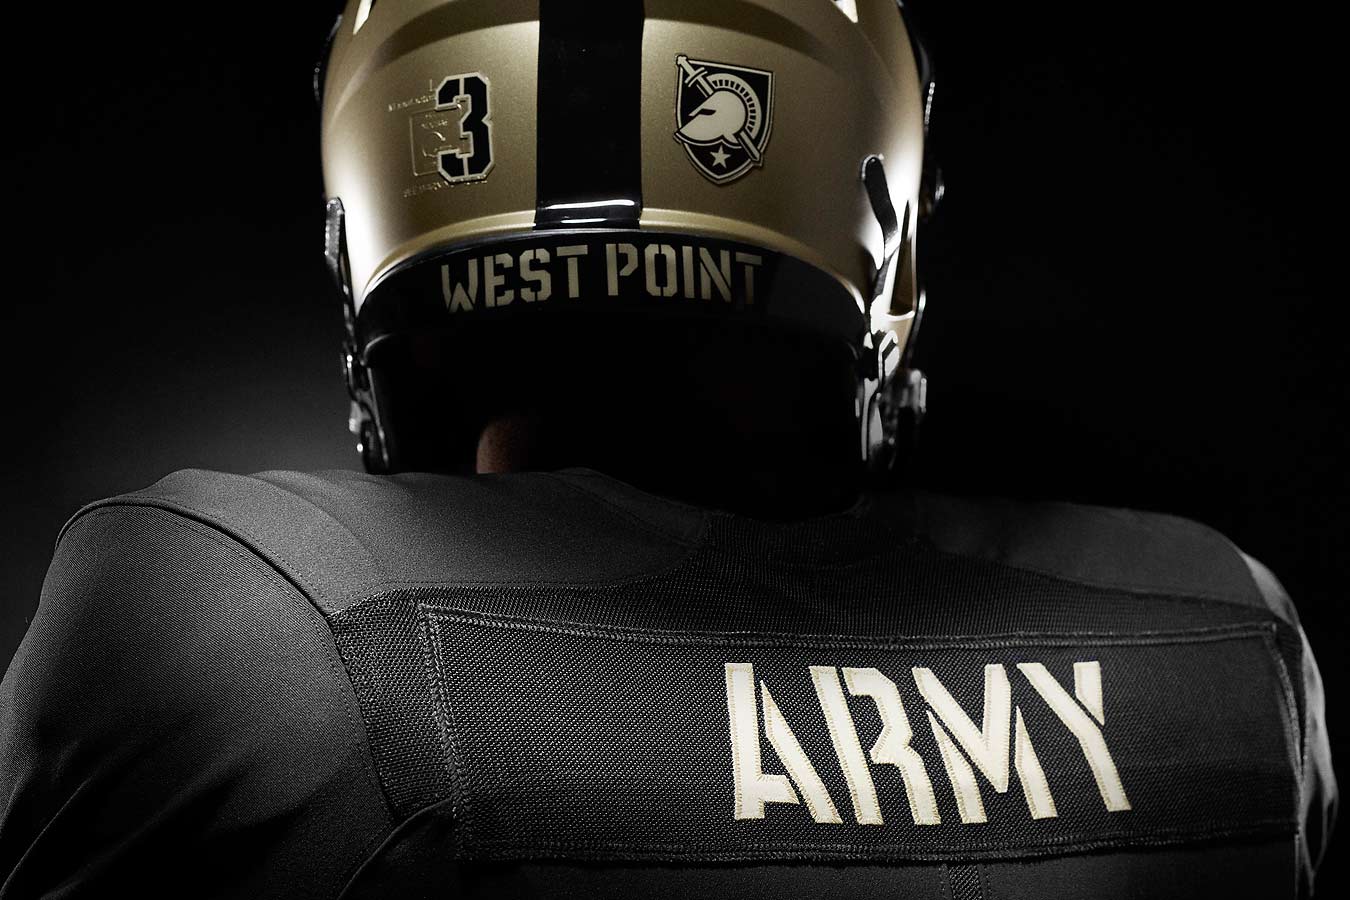 Nike Army Logo - Army unveils new name, uniforms and logo in athletics rebrand | SI.com